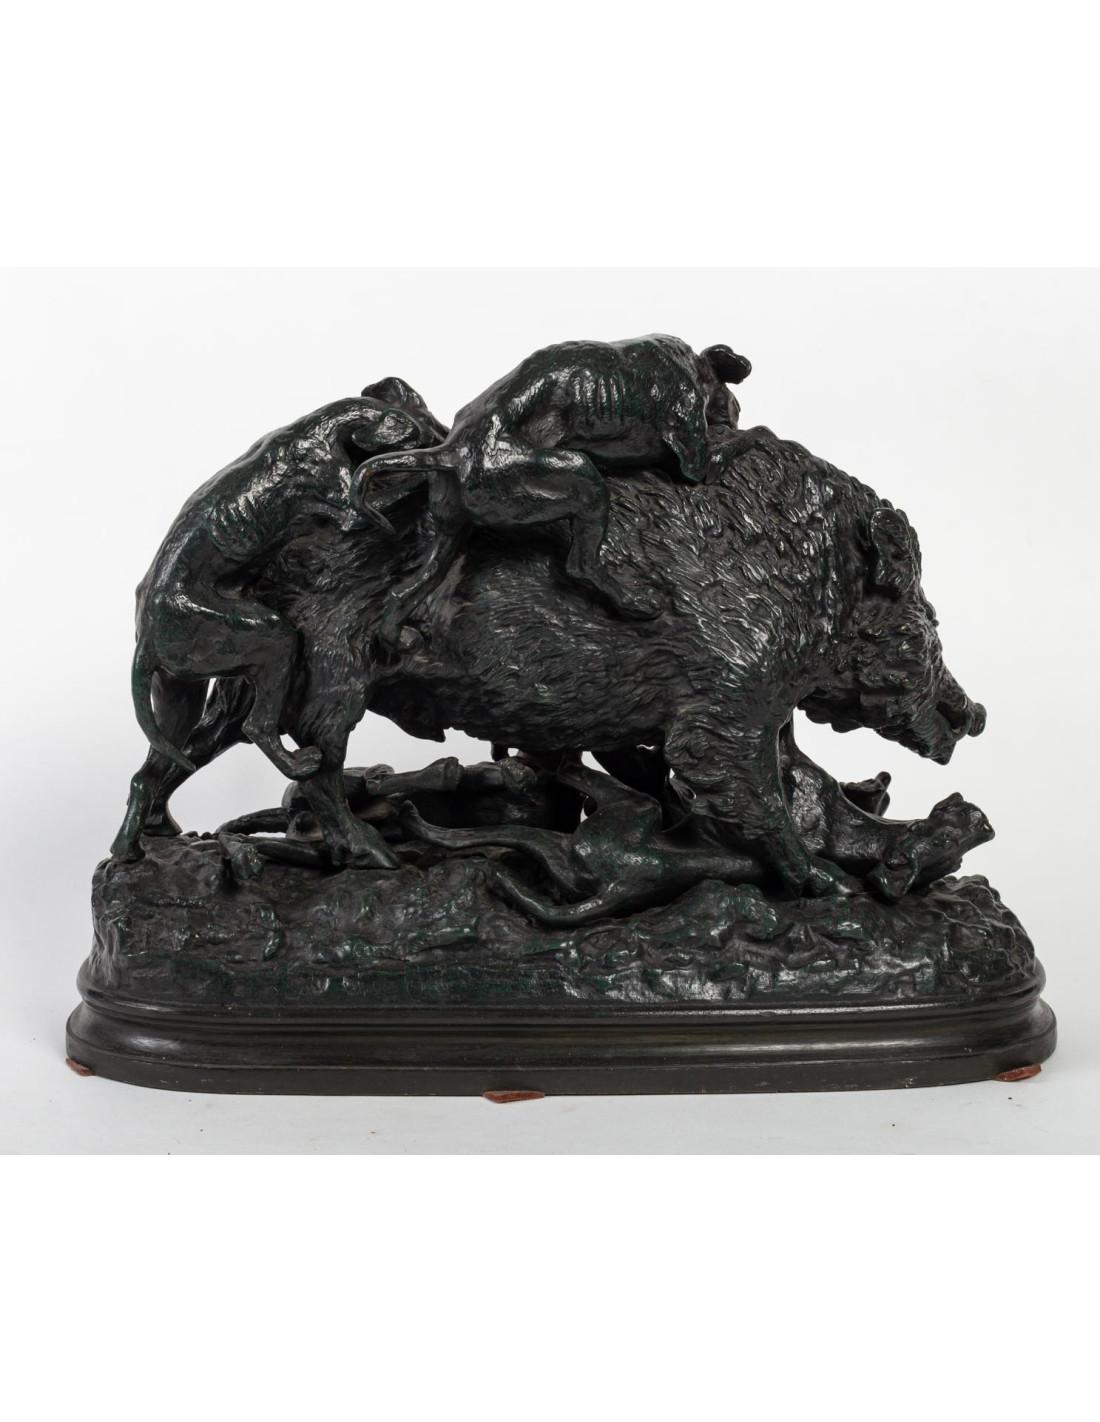 Napoleon III Bronze Sculpture , Hunting Dogs Assaulting the Wild Boar. For Sale